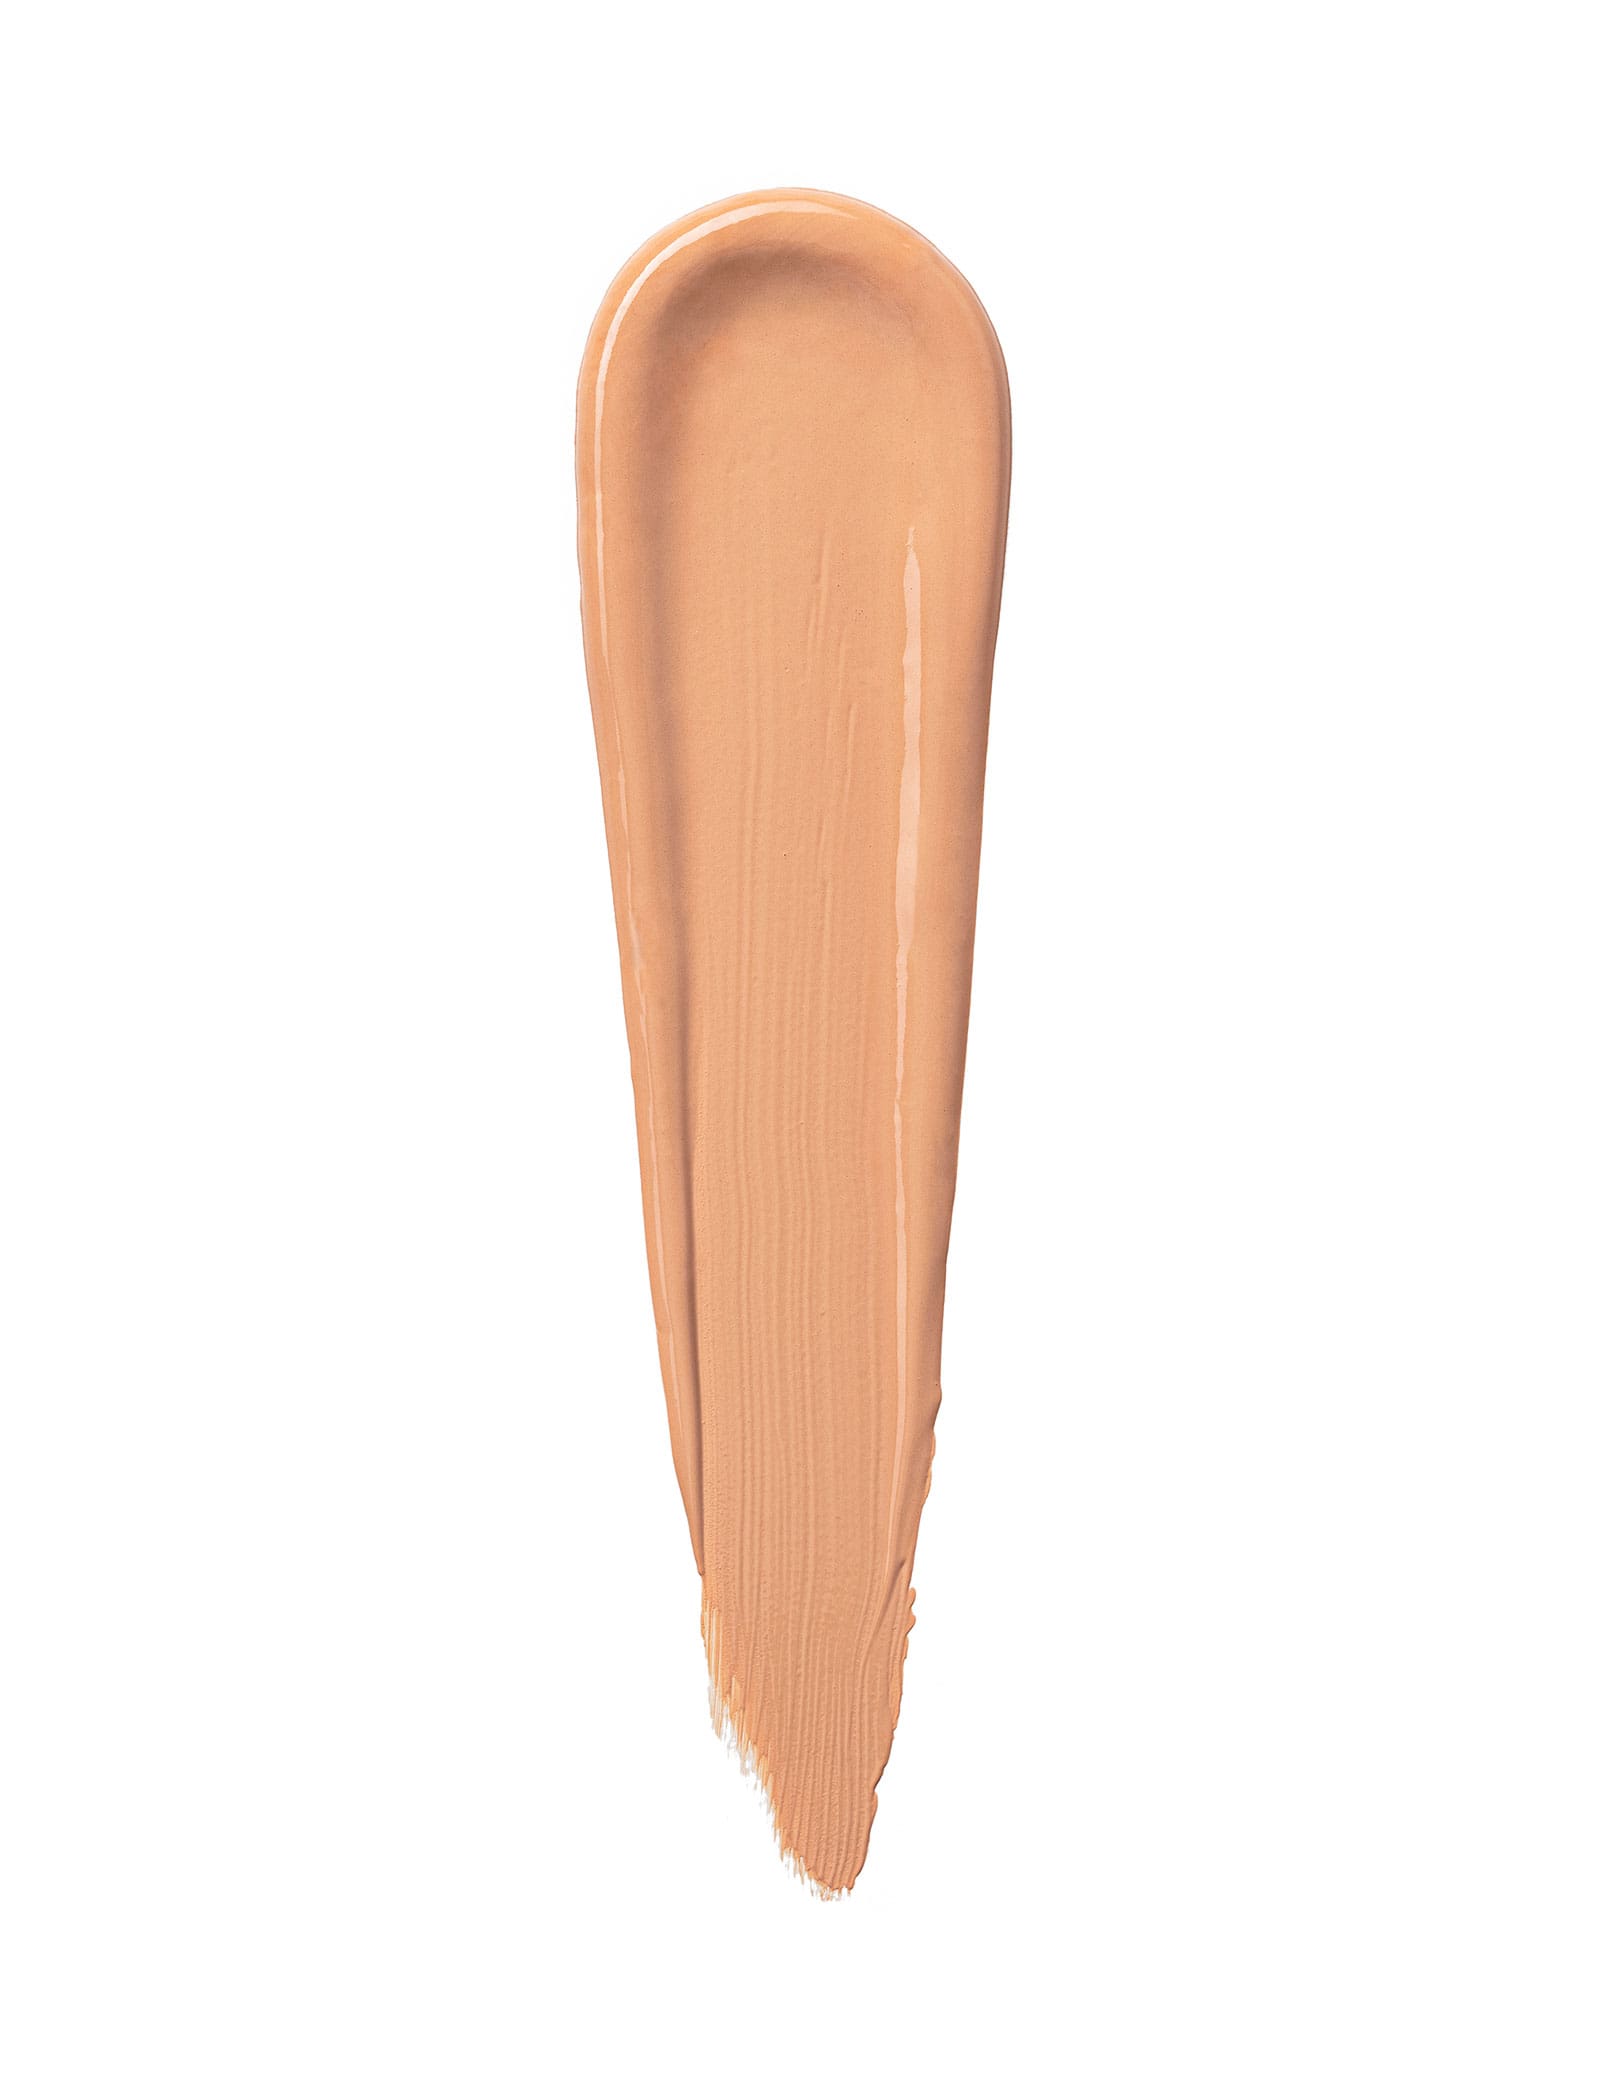 Stay Perfect Concealer 005 Beige